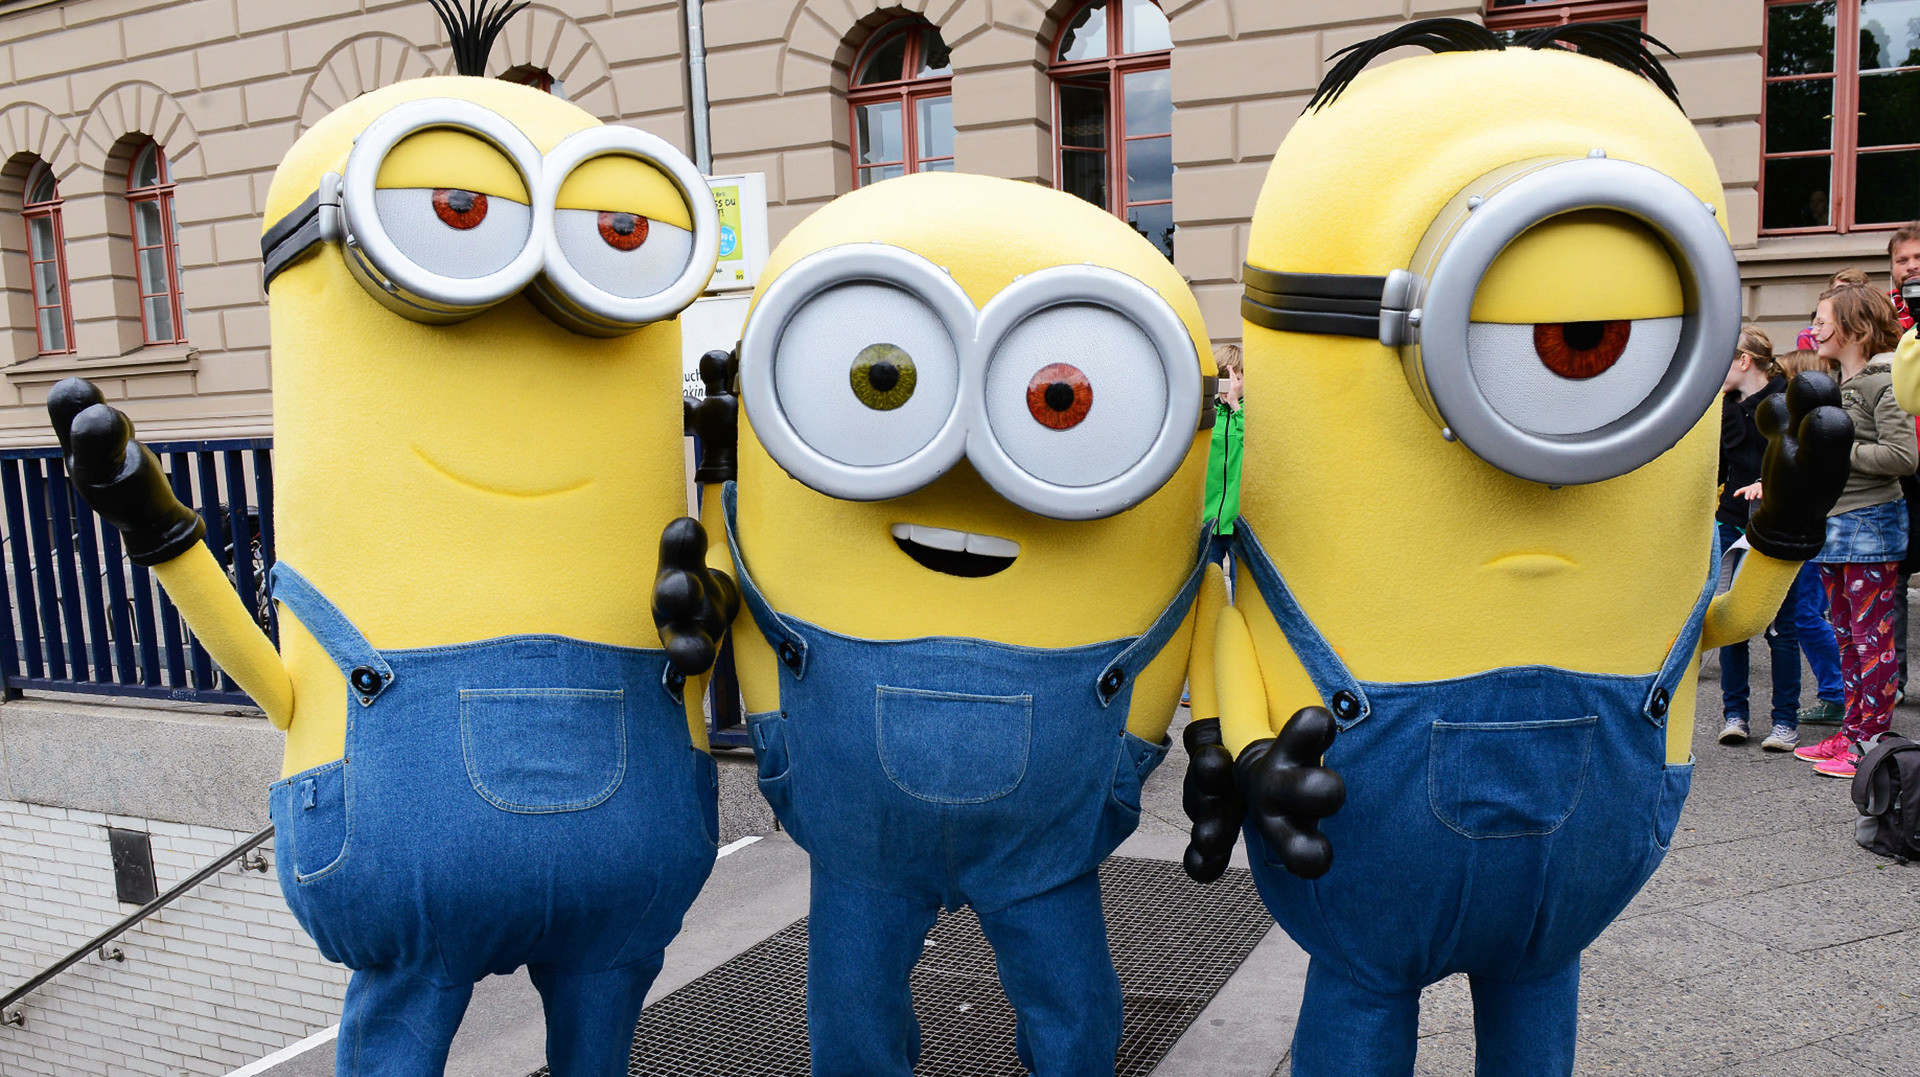 DIY Minion Costume
 How to make a Despicable Me minion costume that ll win